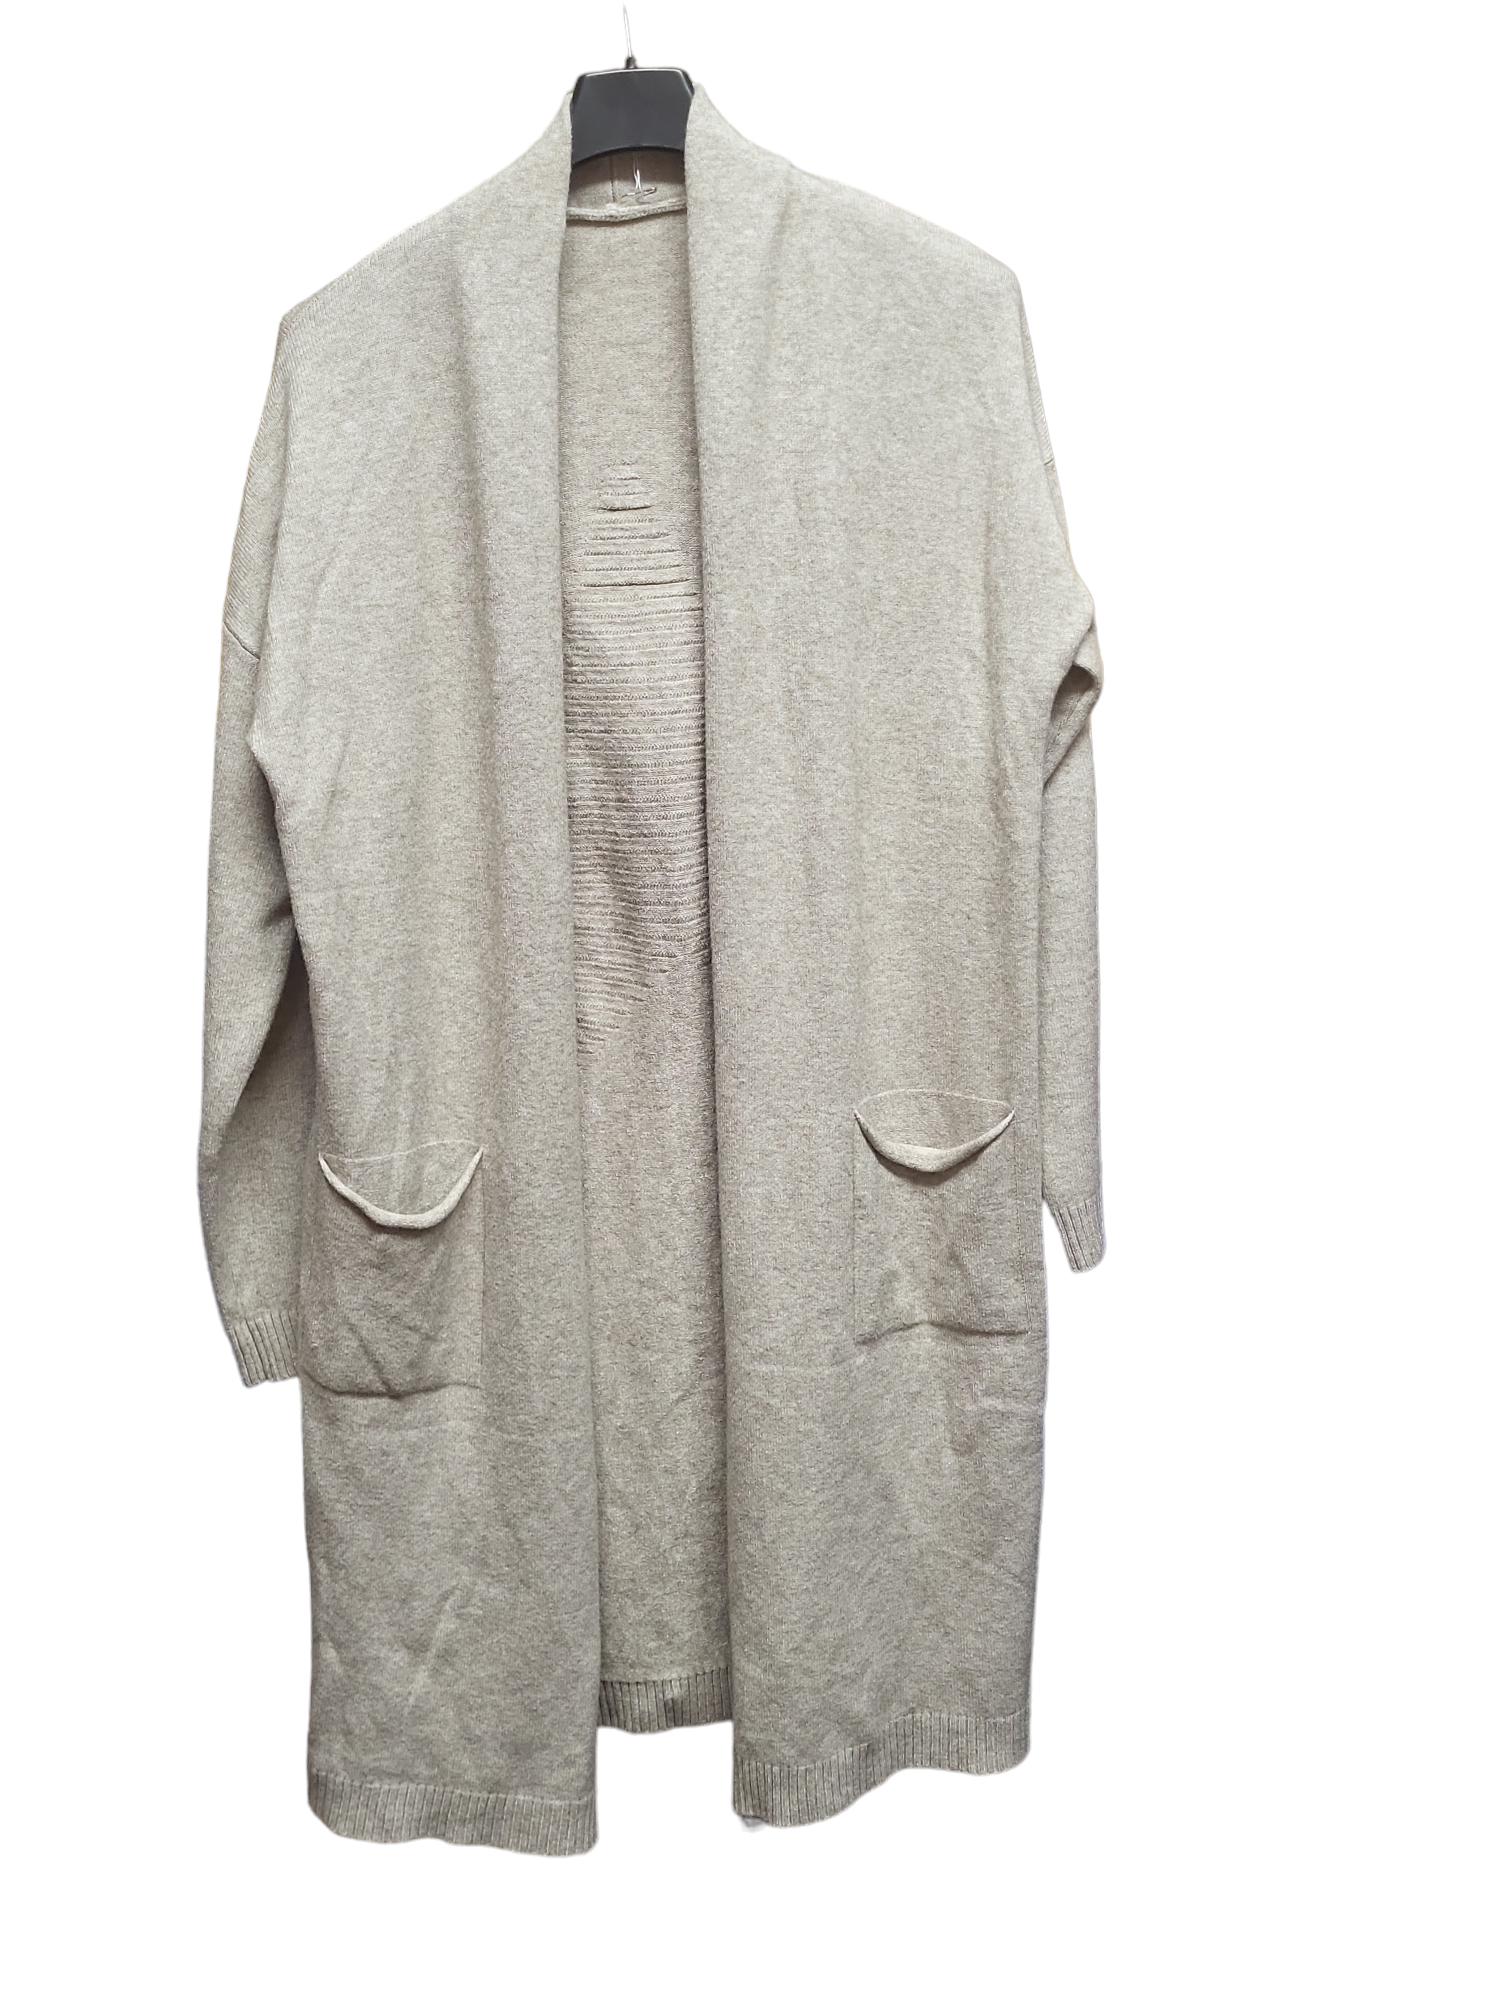 long cream cardigan showing front view with 2 pockets and no buttons